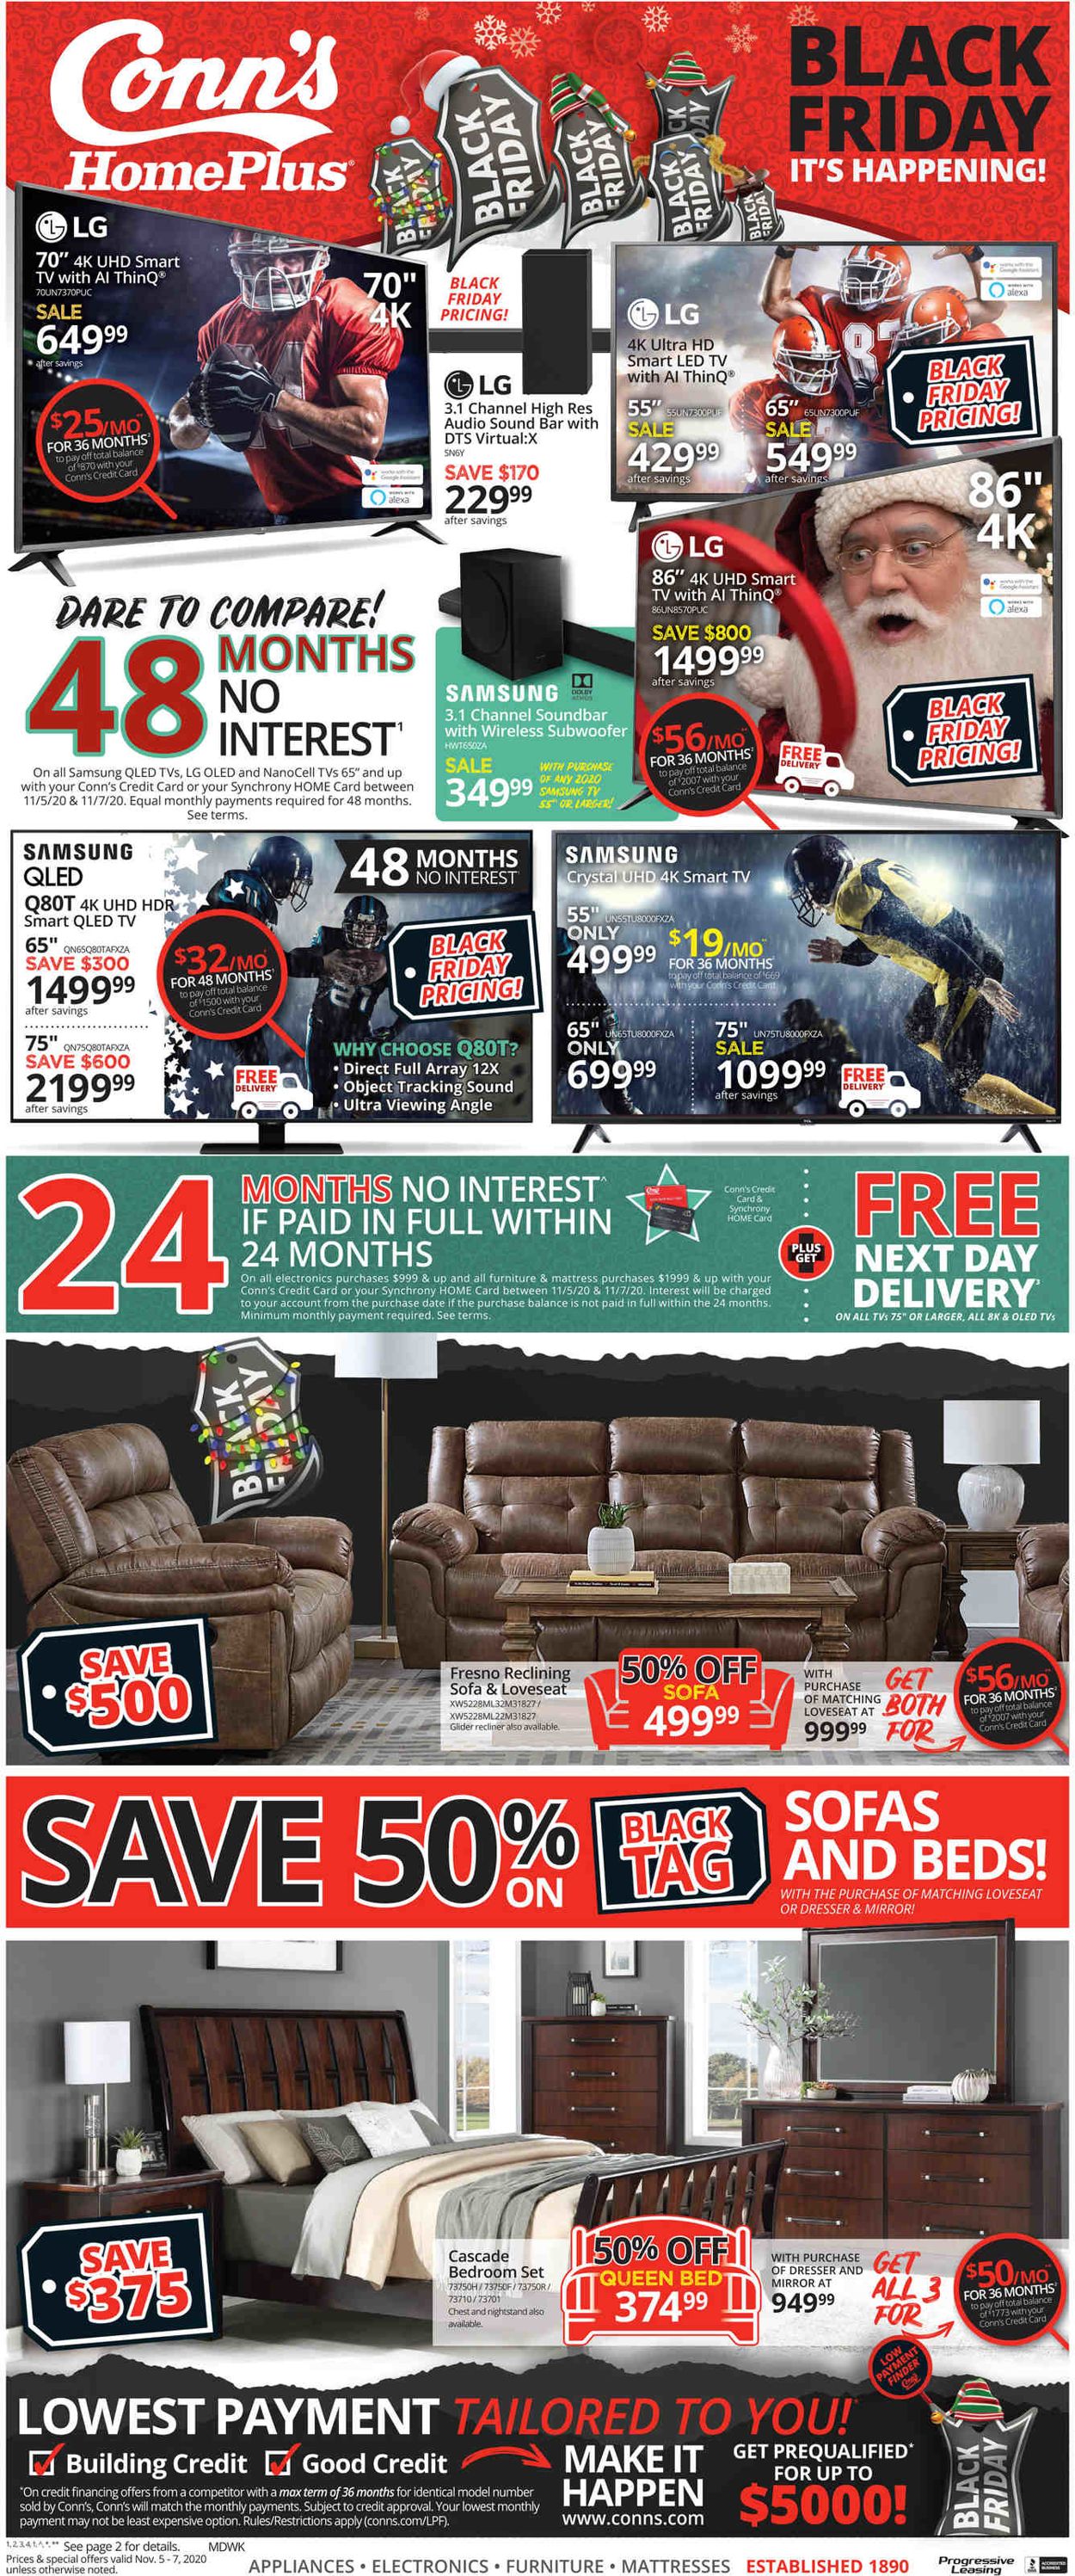 Conn's Home Plus Black Friday 2020 Current weekly ad 11/05 11/07/2020